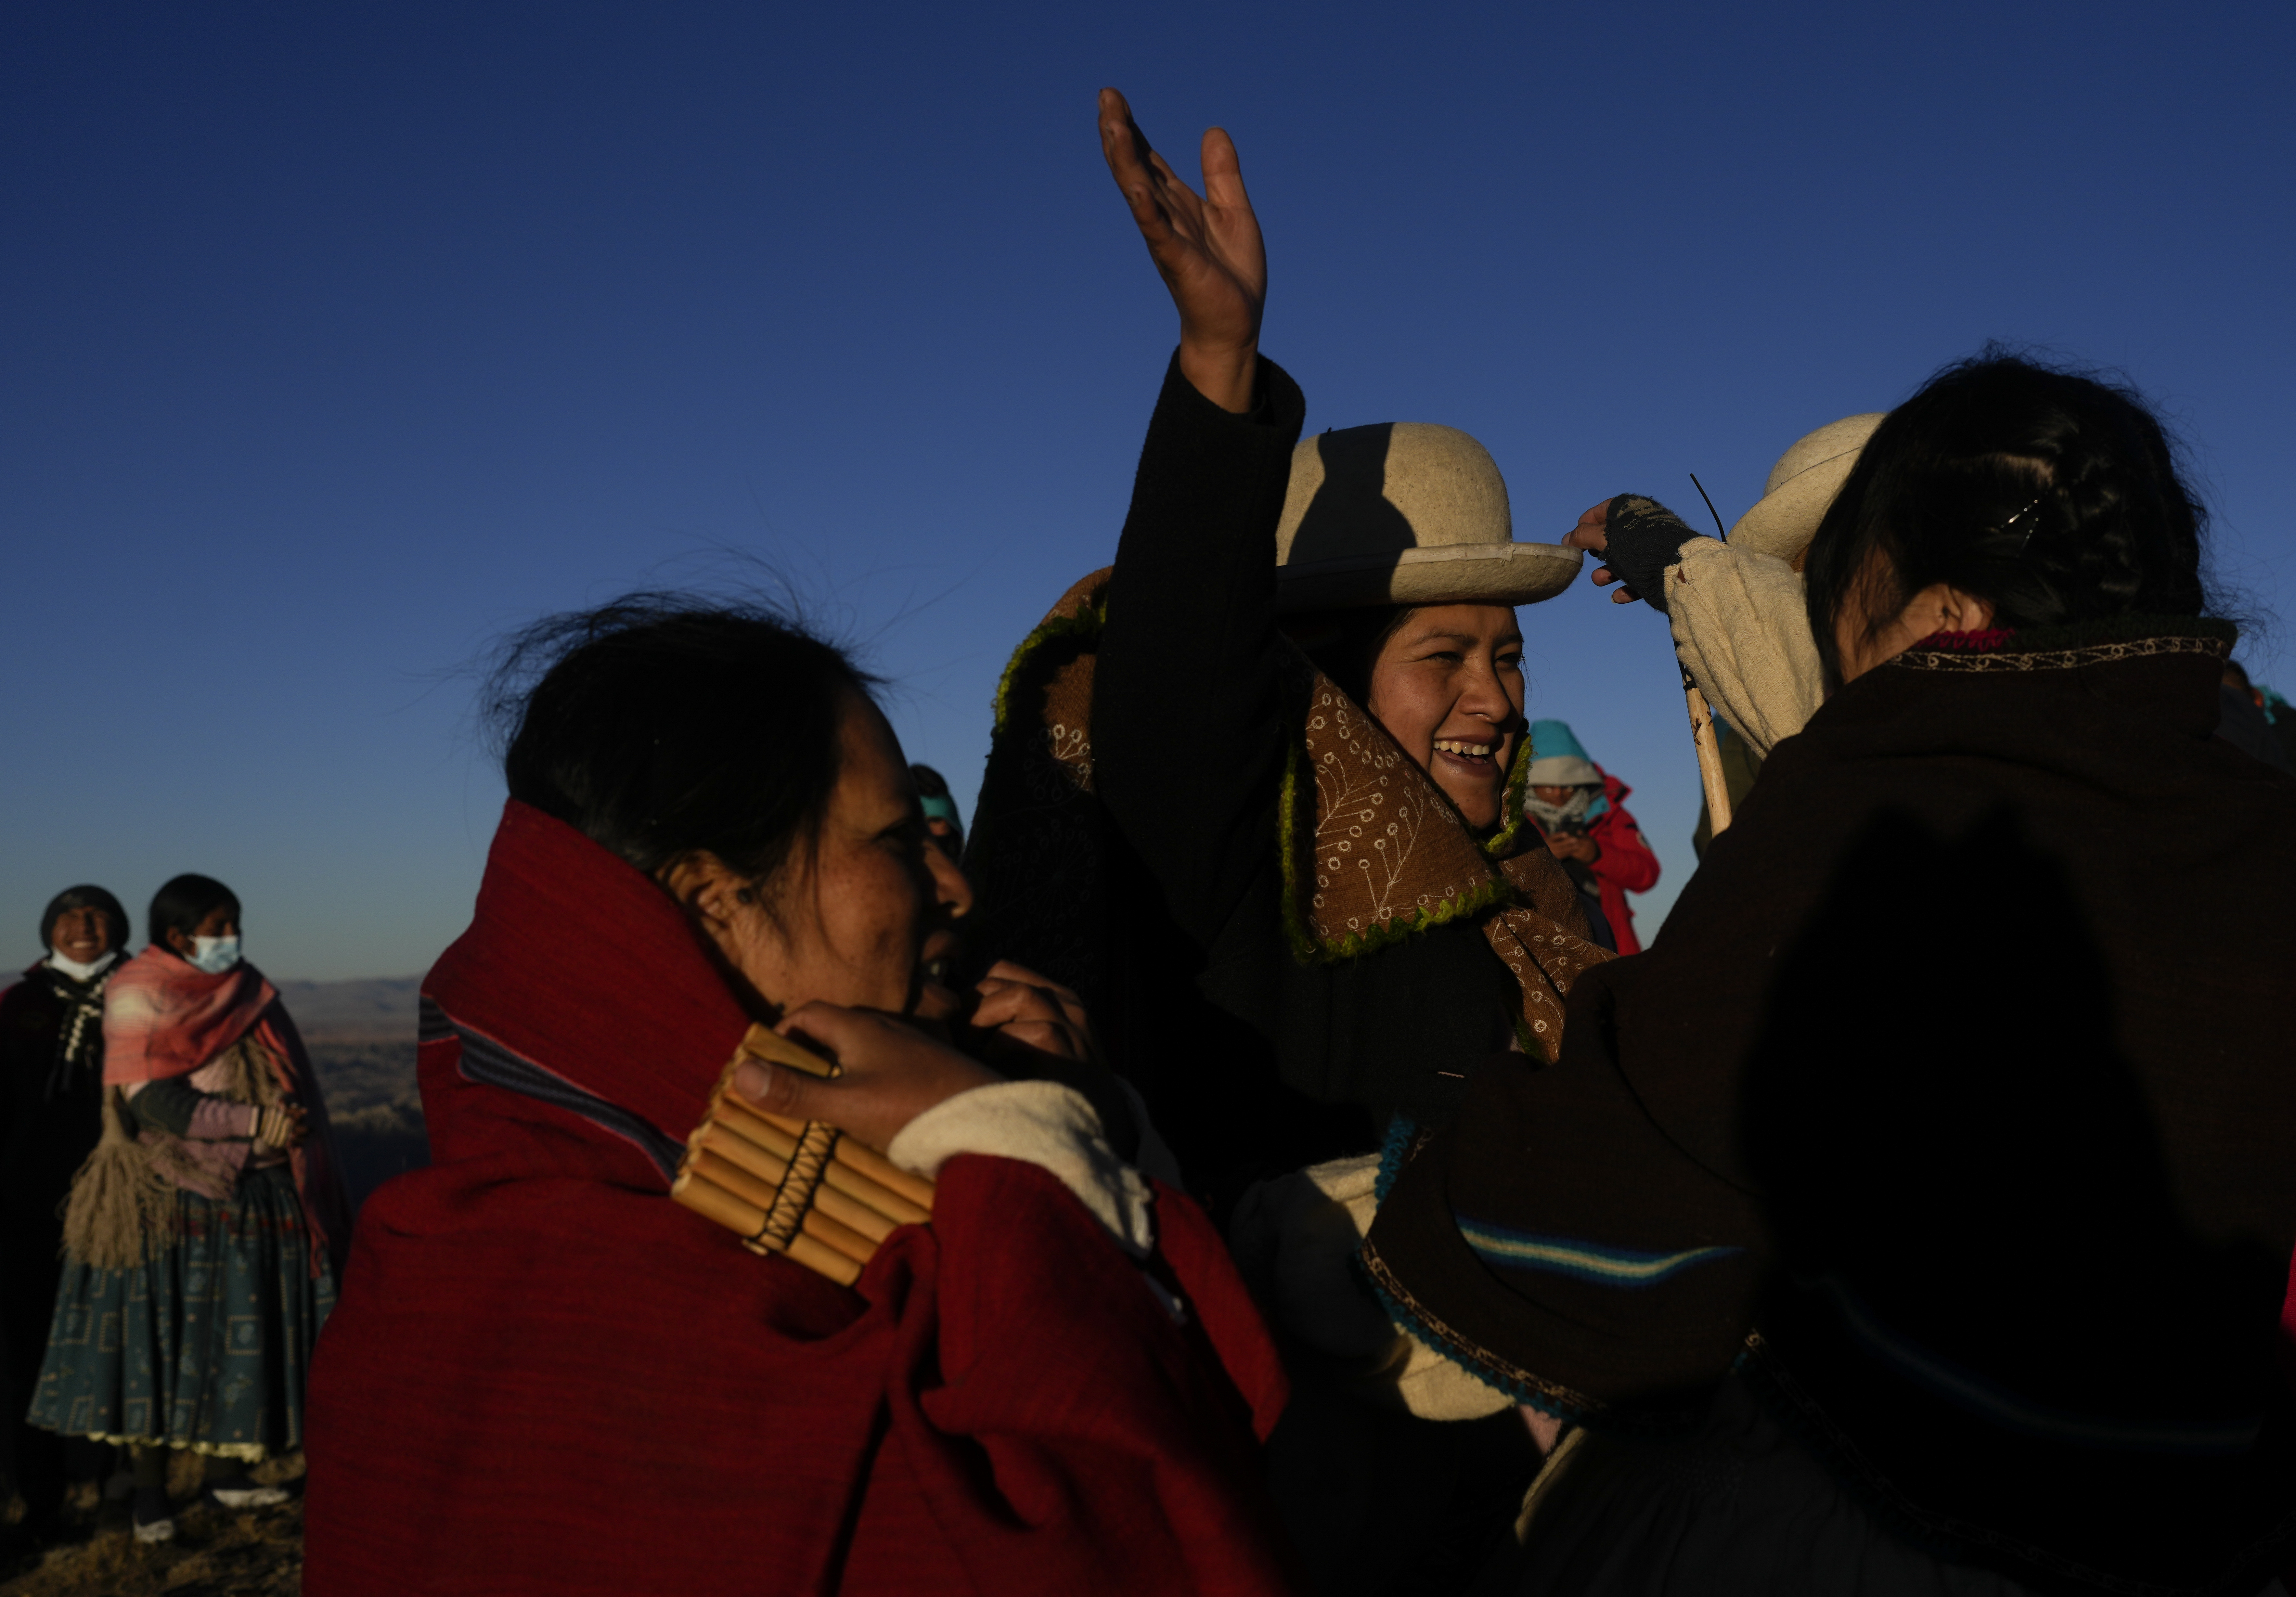 Aymara women embrace after receiving the first rays of sunlight in a New Year's ritual on the sacred mountain Apacheta Murmutani on the outskirts of Hampaturi, Bolivia, early Wednesday, June 21, 2023. Aymara Indigenous communities are celebrating the Andean new year 5,531 or 